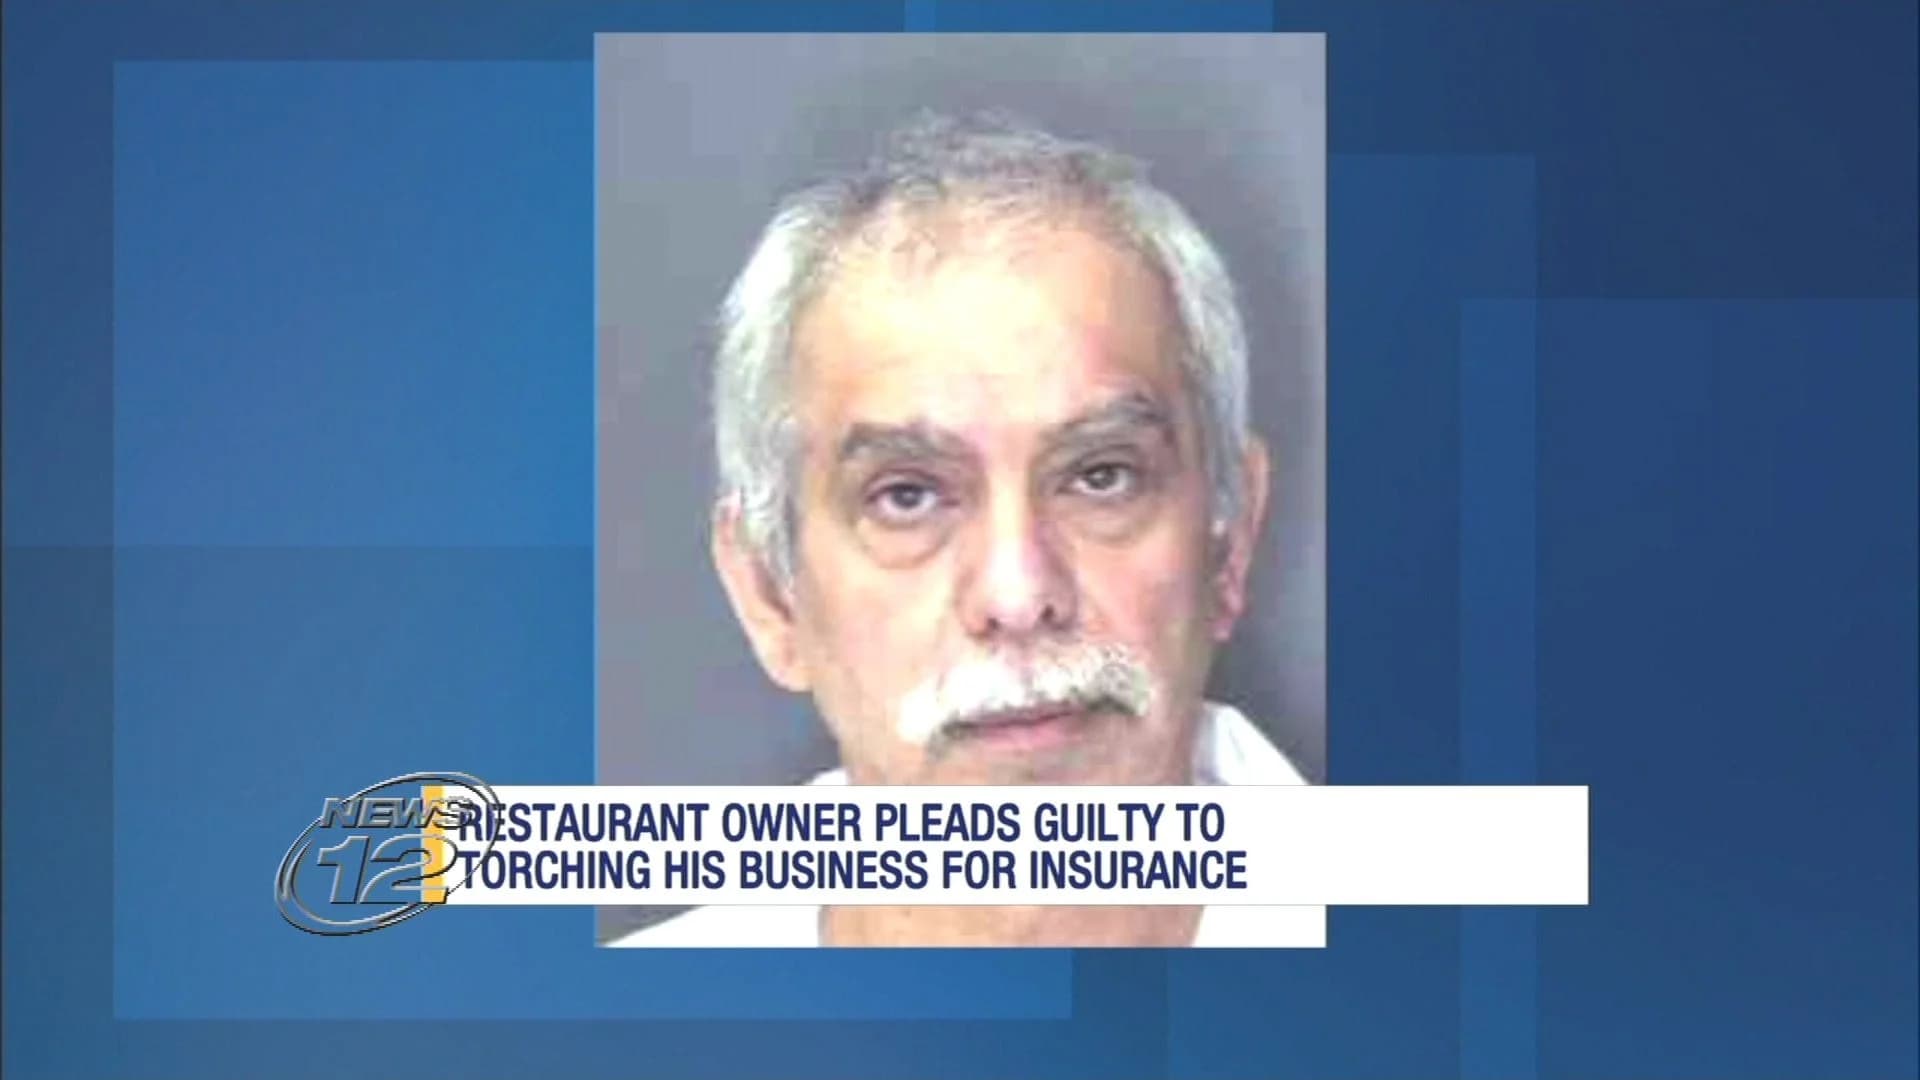 Orange County man pleads guilty to torching restaurant